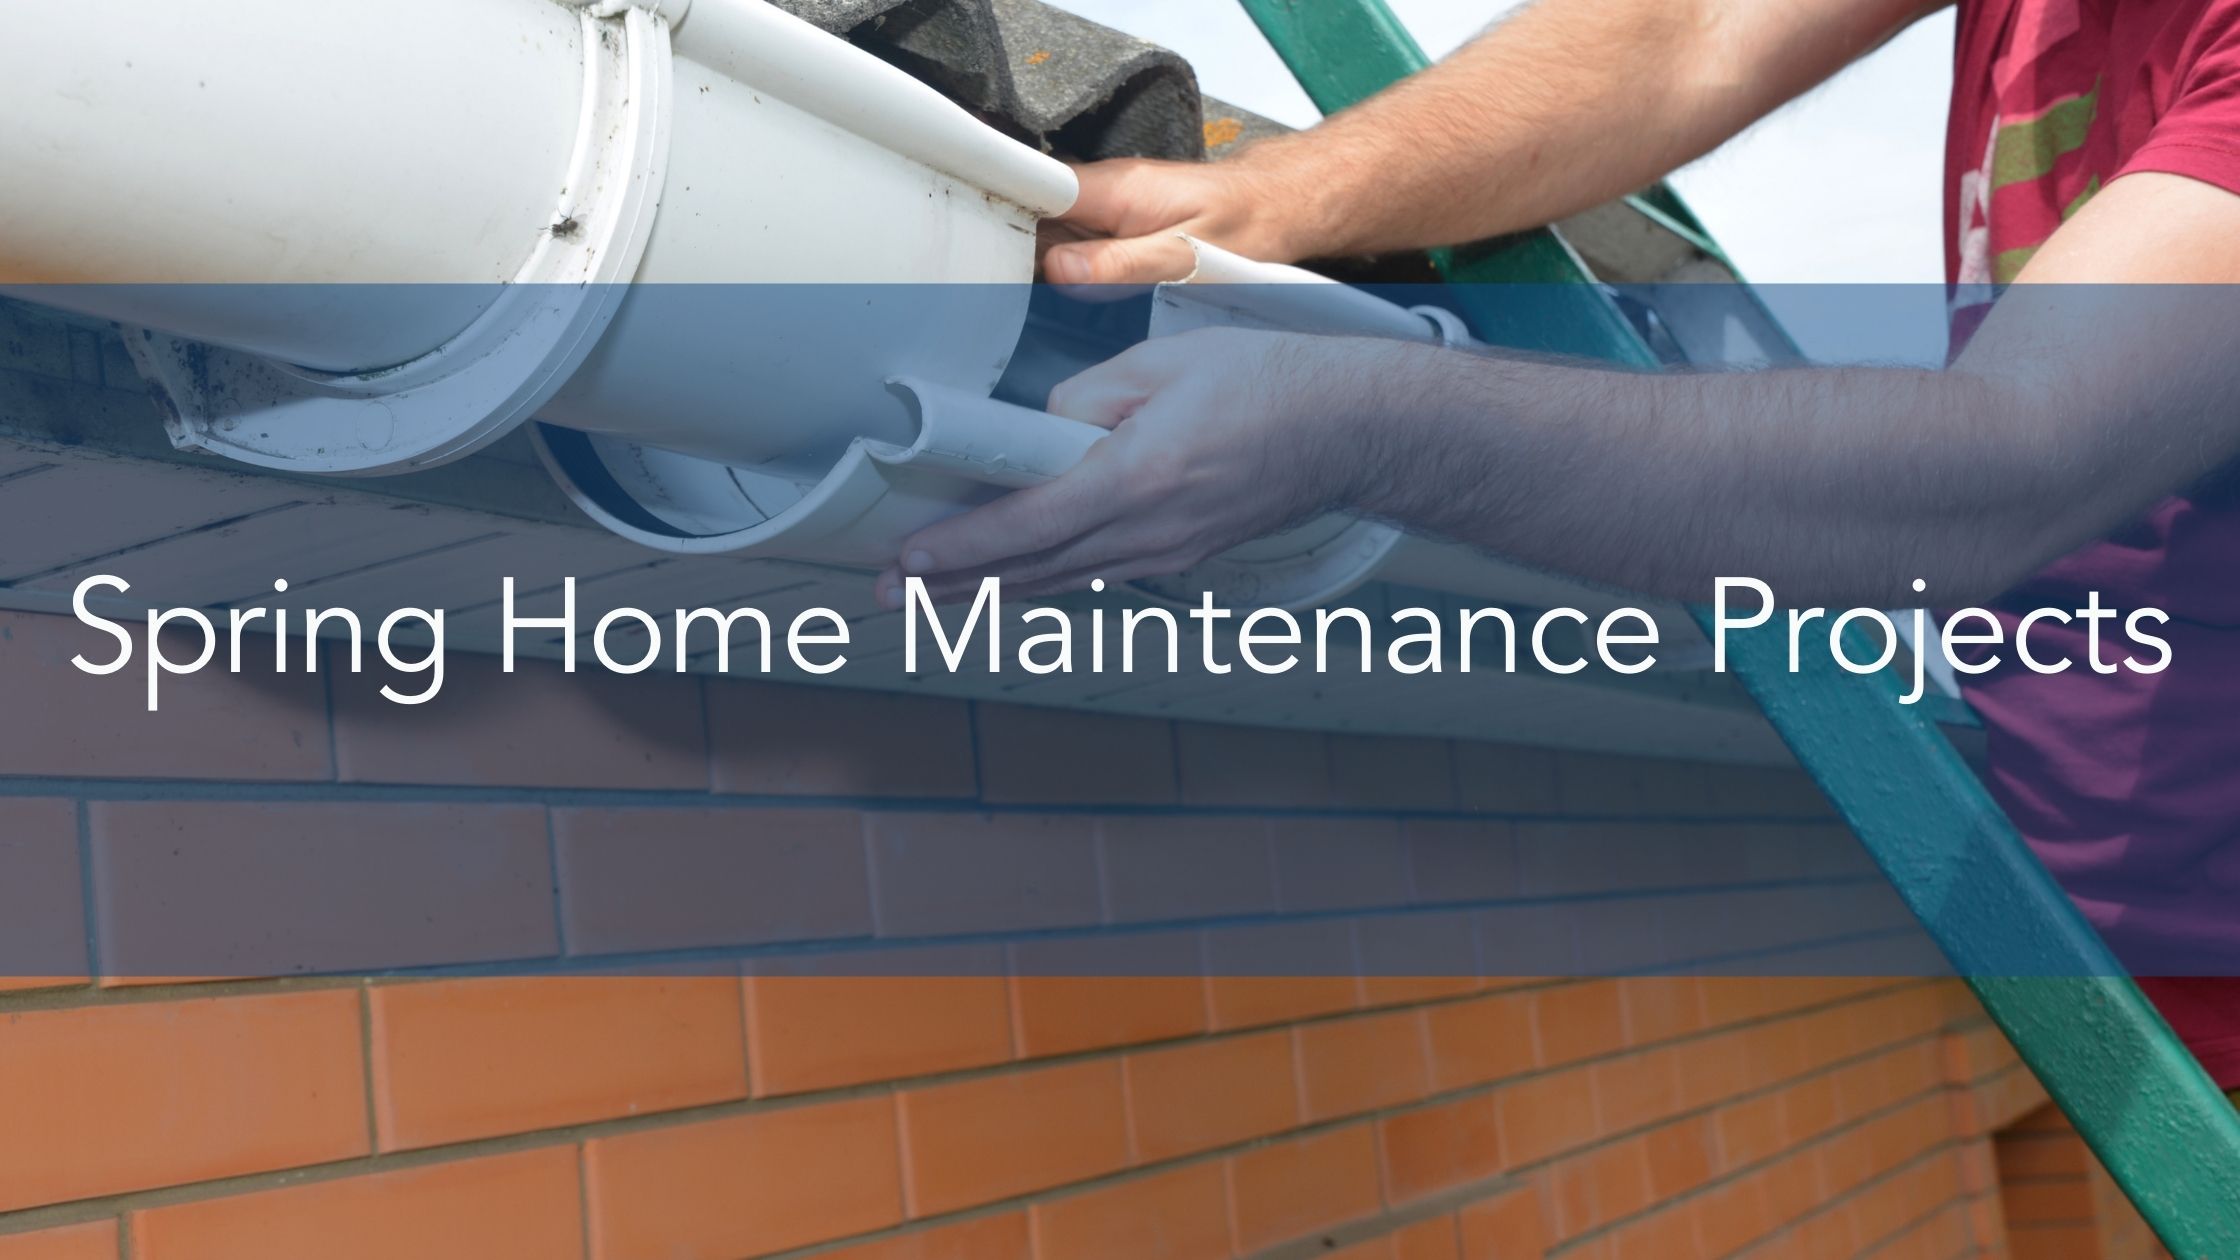 Spring Home Maintenance Projects